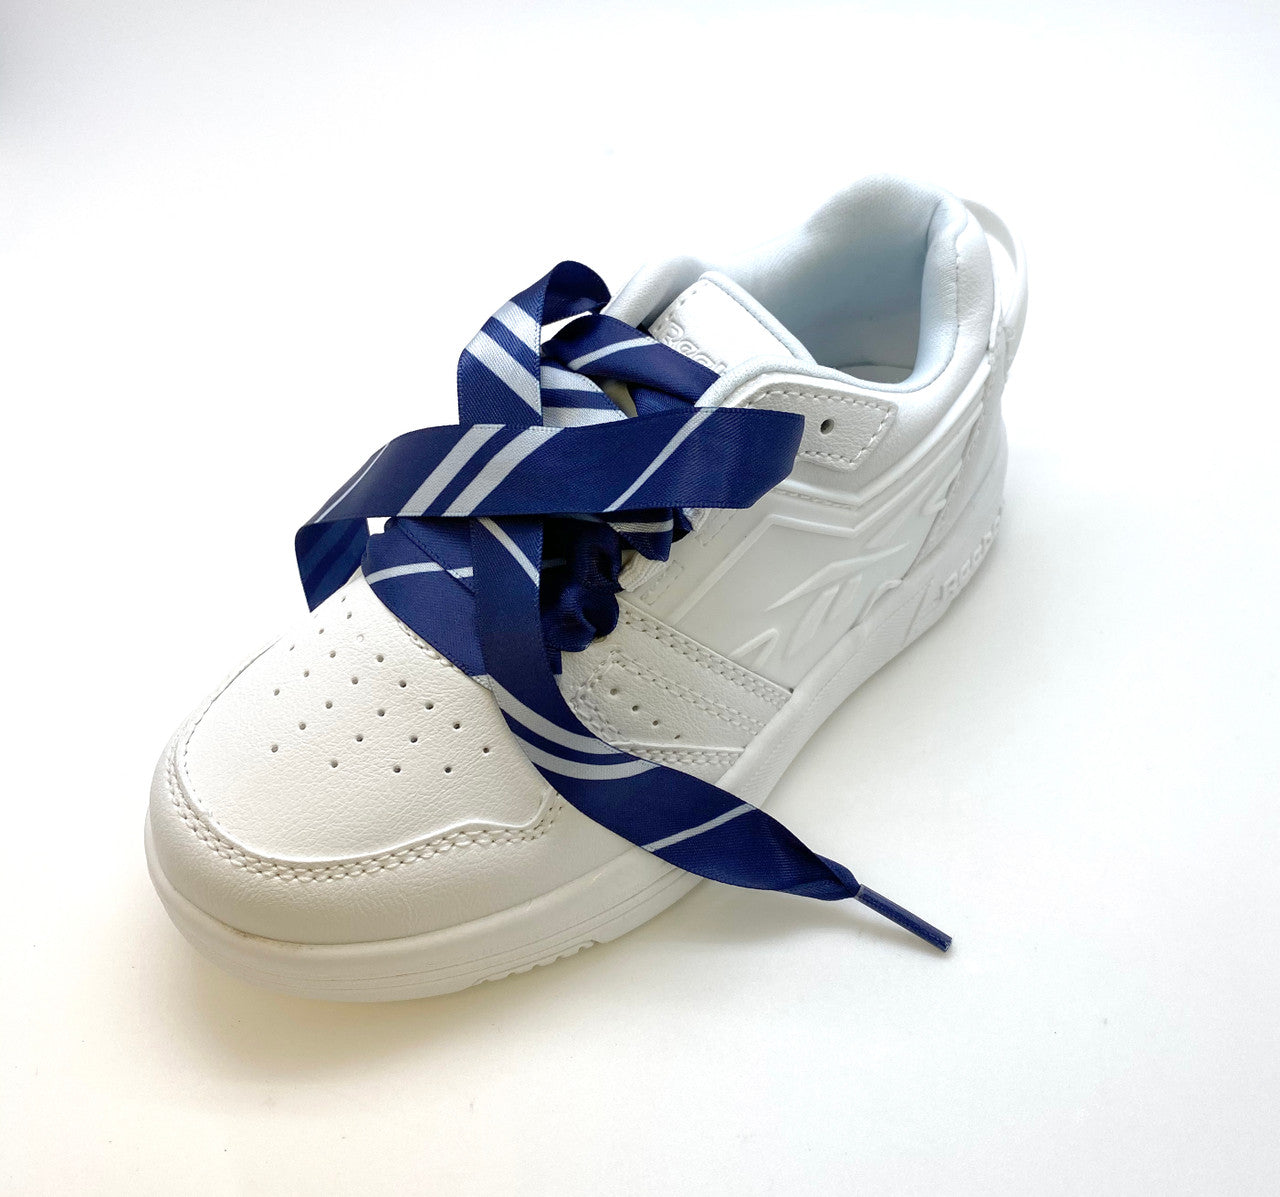 Fun fashion shoelaces will make you want to dance through your day! Lace your shoes with  our fun navy blue and silver stripe design